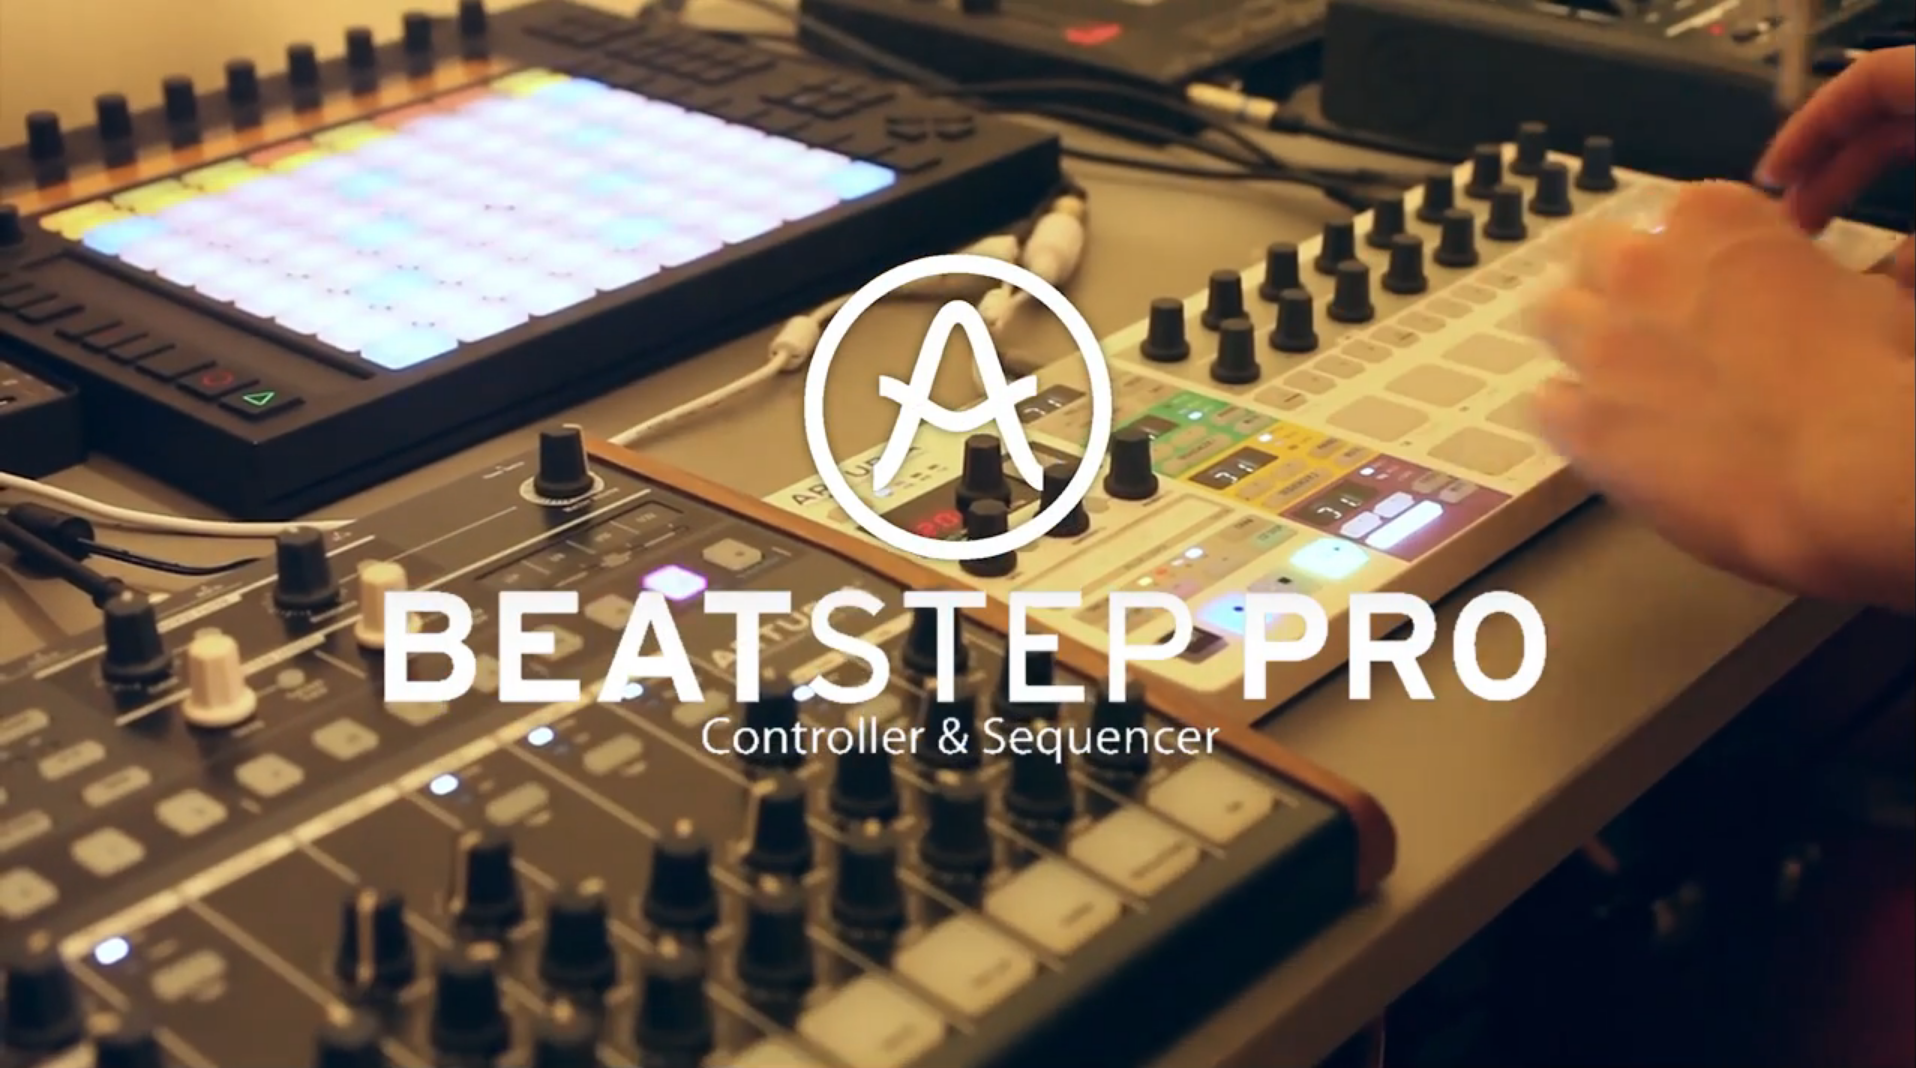 Arturia Beatstep Pro: step sequencer / controller review and hands-on performance